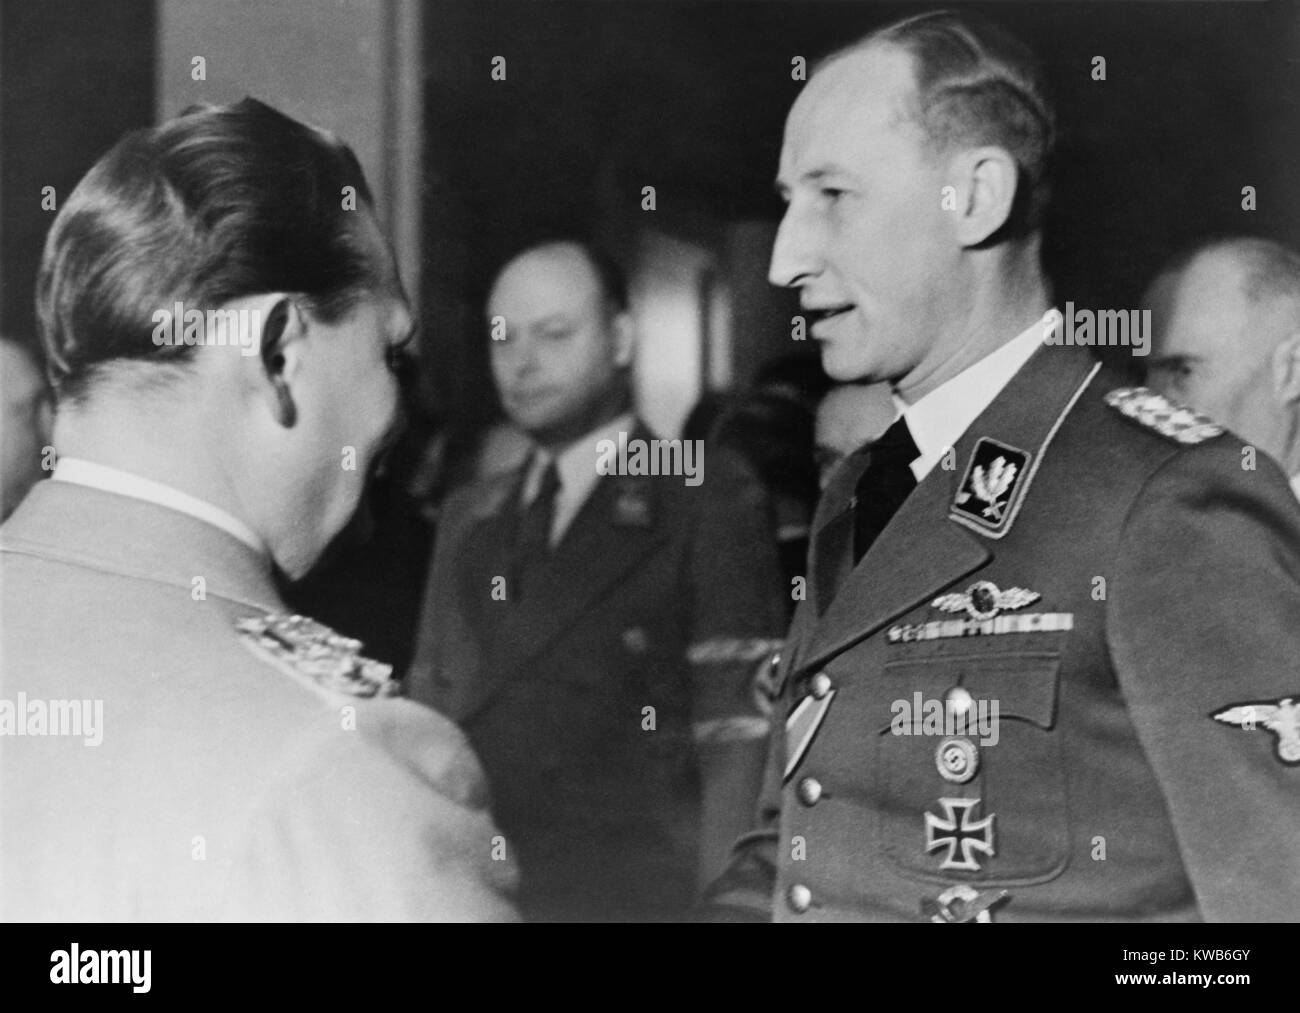 Reinhard Heydrich speaking with Hermann Goering at Goering's birthday celebration, Jan. 12, 1942. In this same month, January 1942, Heydrich chaired the Wannsee Conference, which planned the 'final solution' for the deportation and extermination of all Jews in German-occupied territory during World War 2. (BSLOC 2014 8 155) Stock Photo